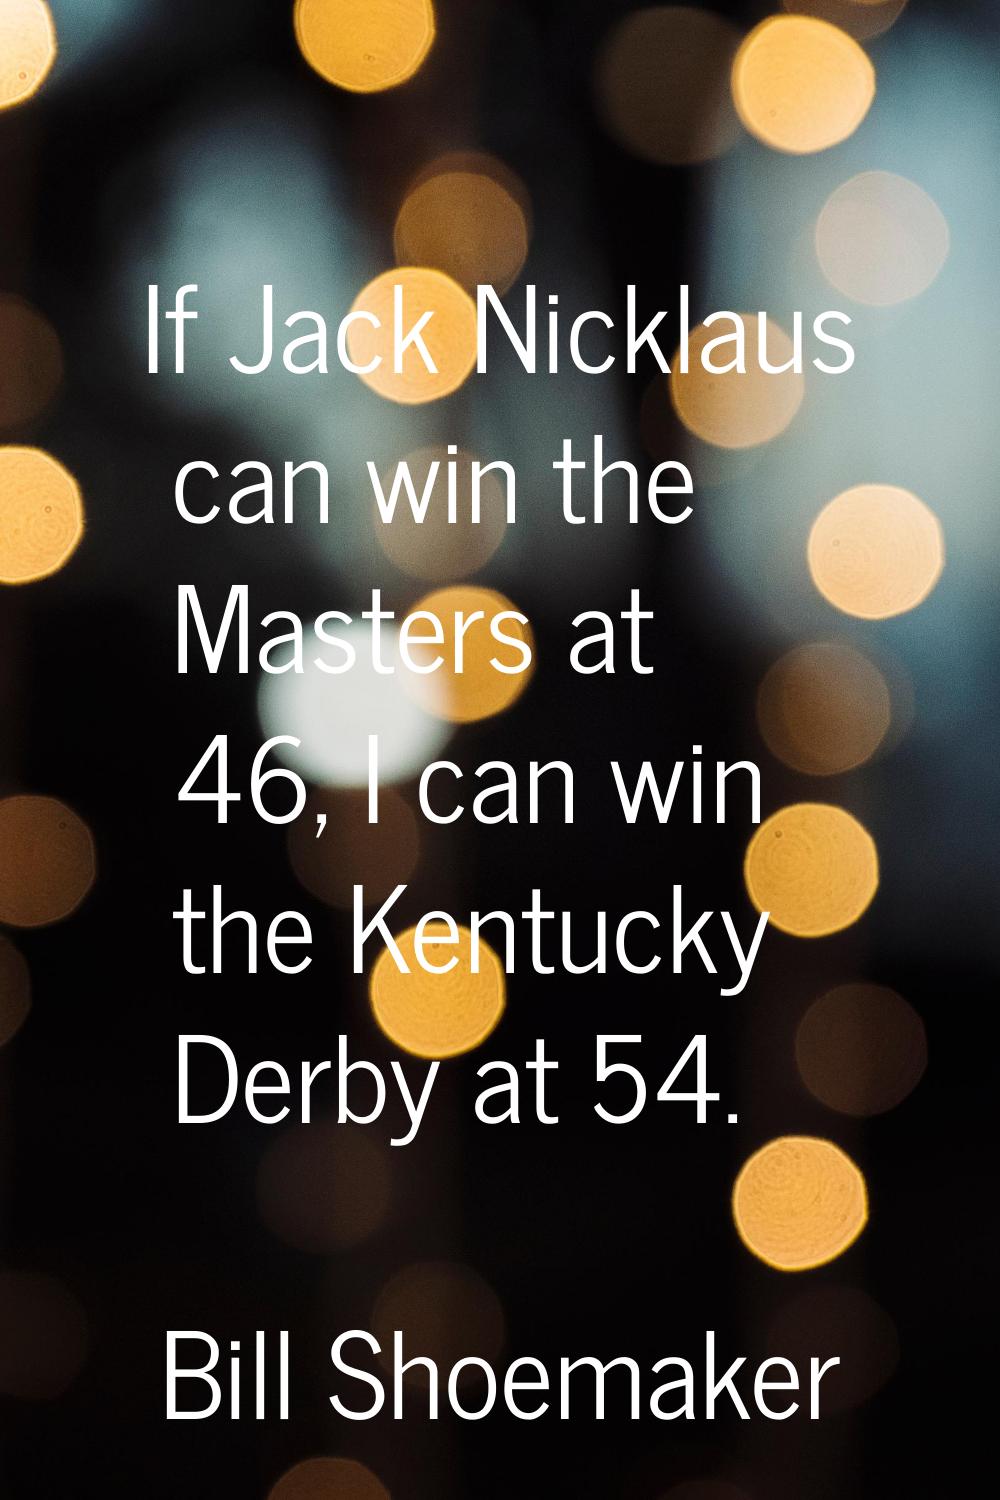 If Jack Nicklaus can win the Masters at 46, I can win the Kentucky Derby at 54.